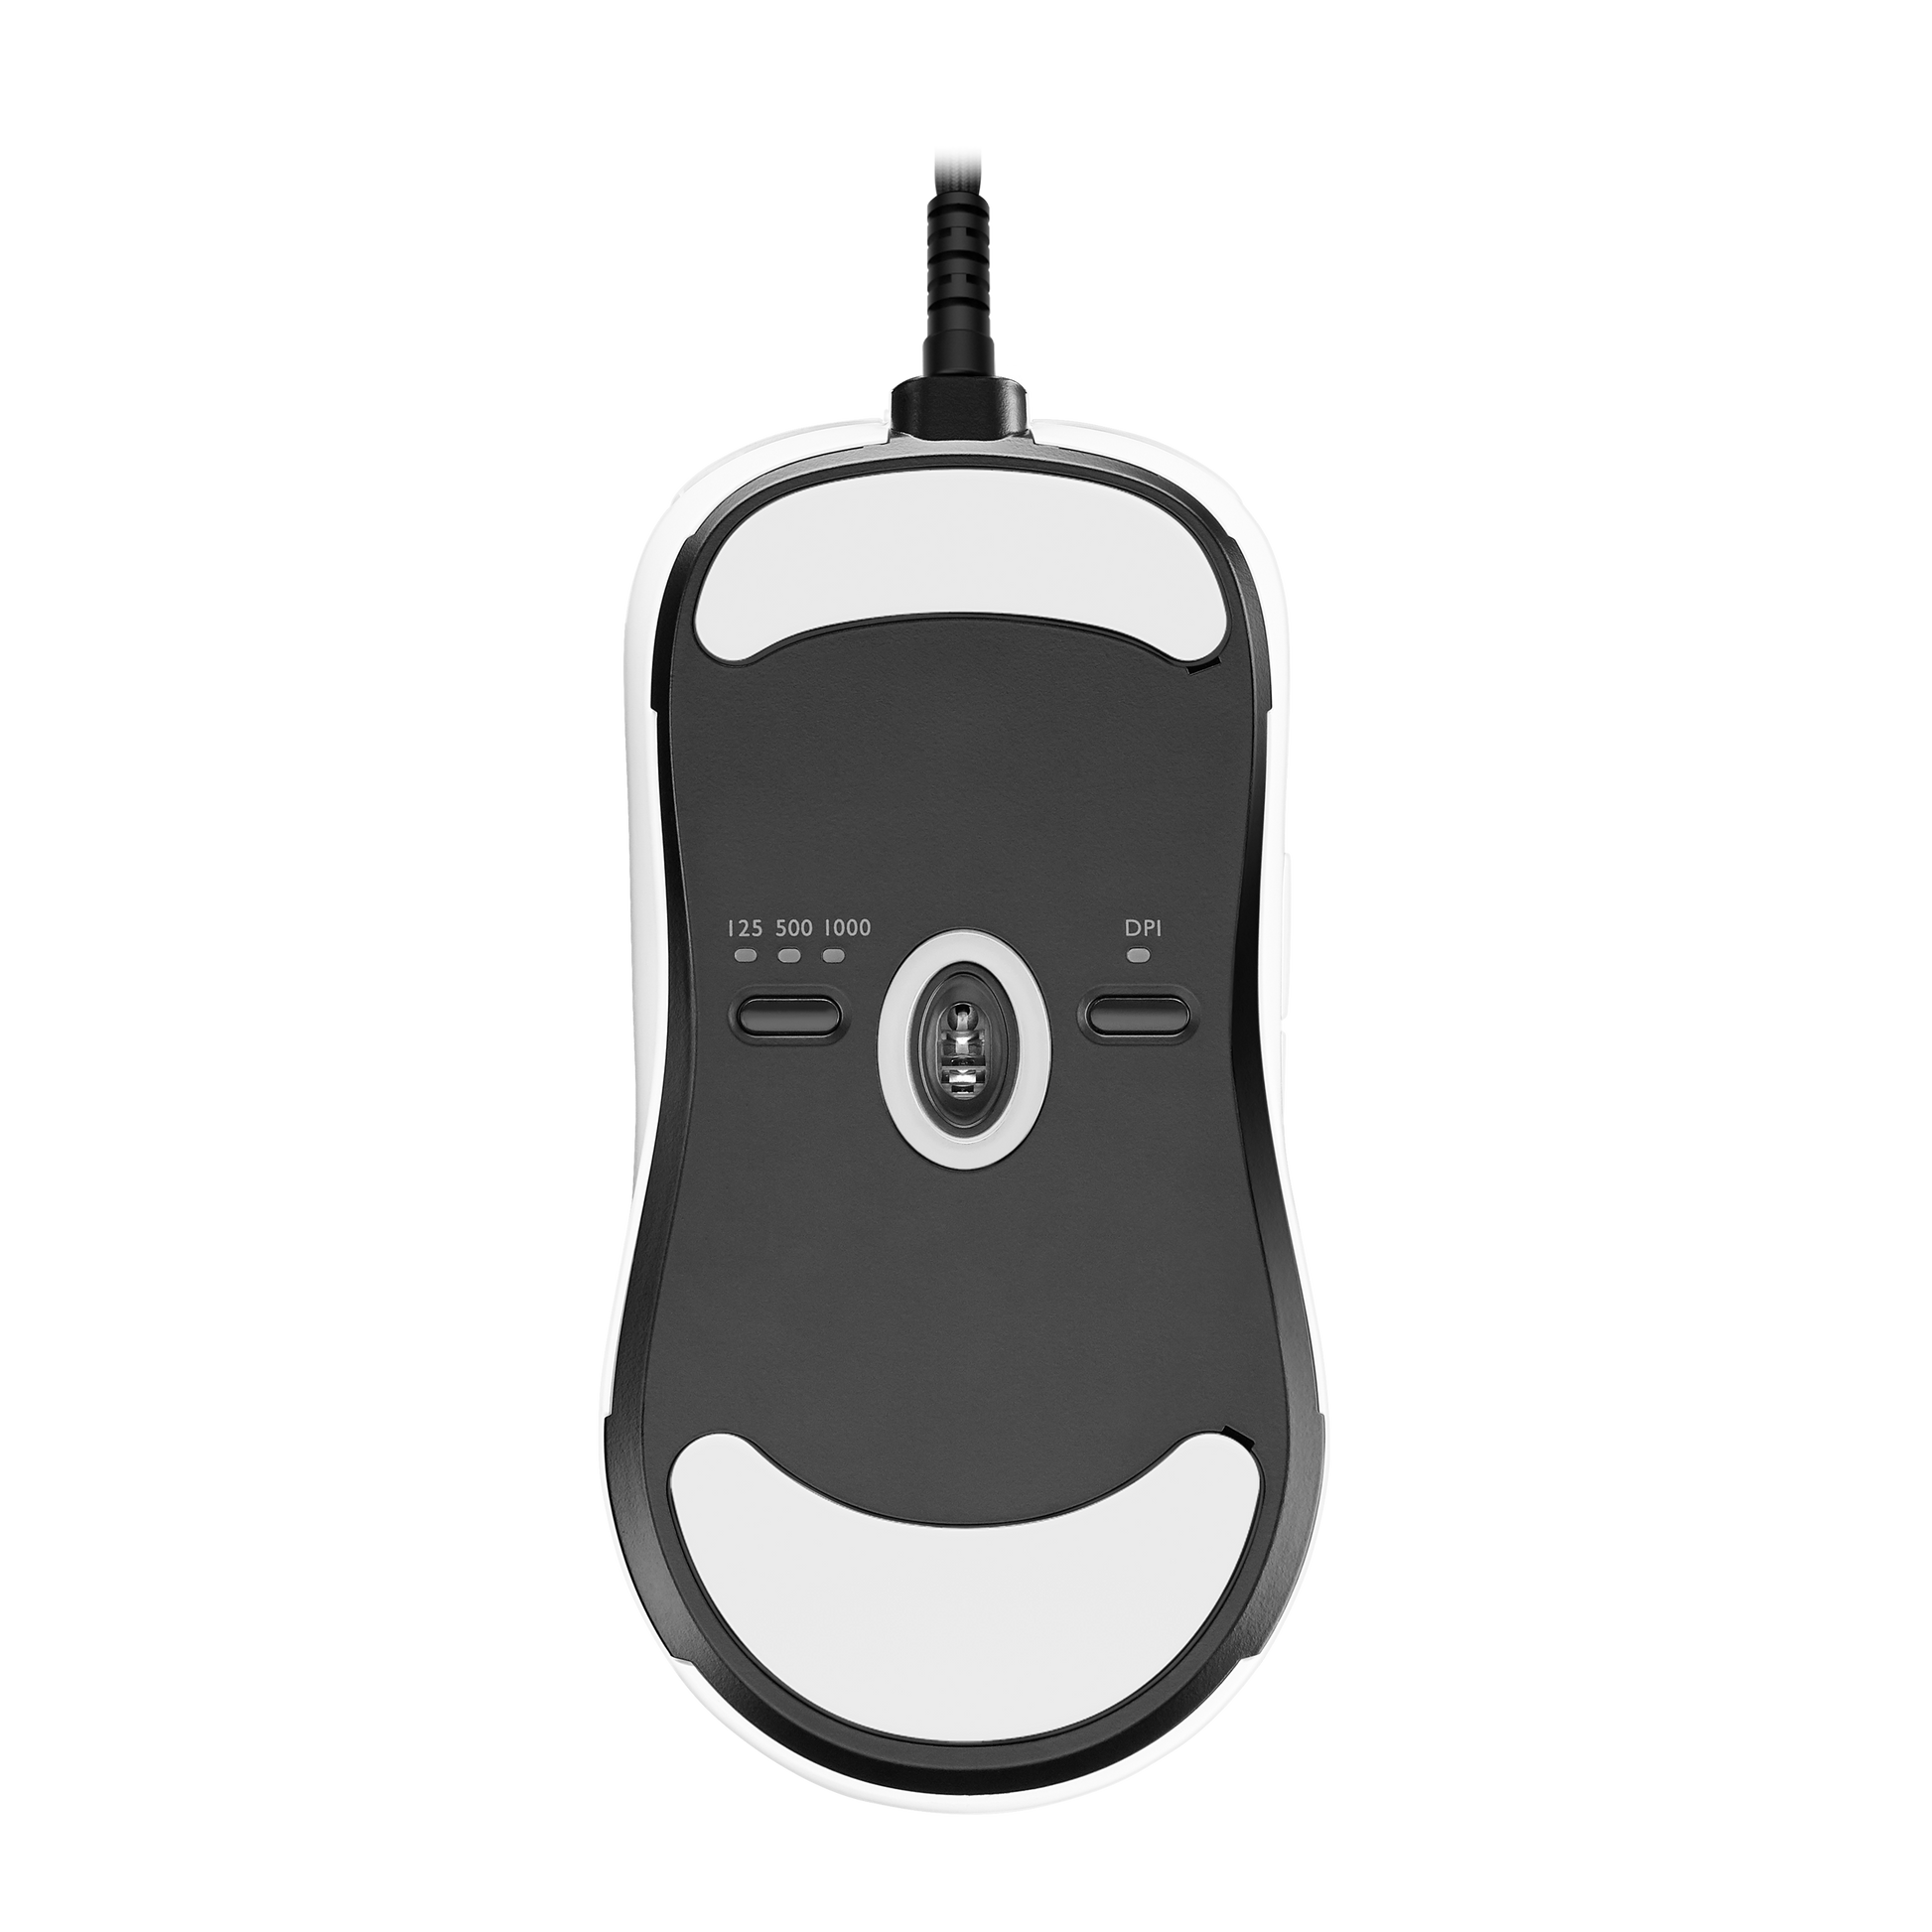 BenQ Zowie FK1-B White Edition V2 Mouse for eSports